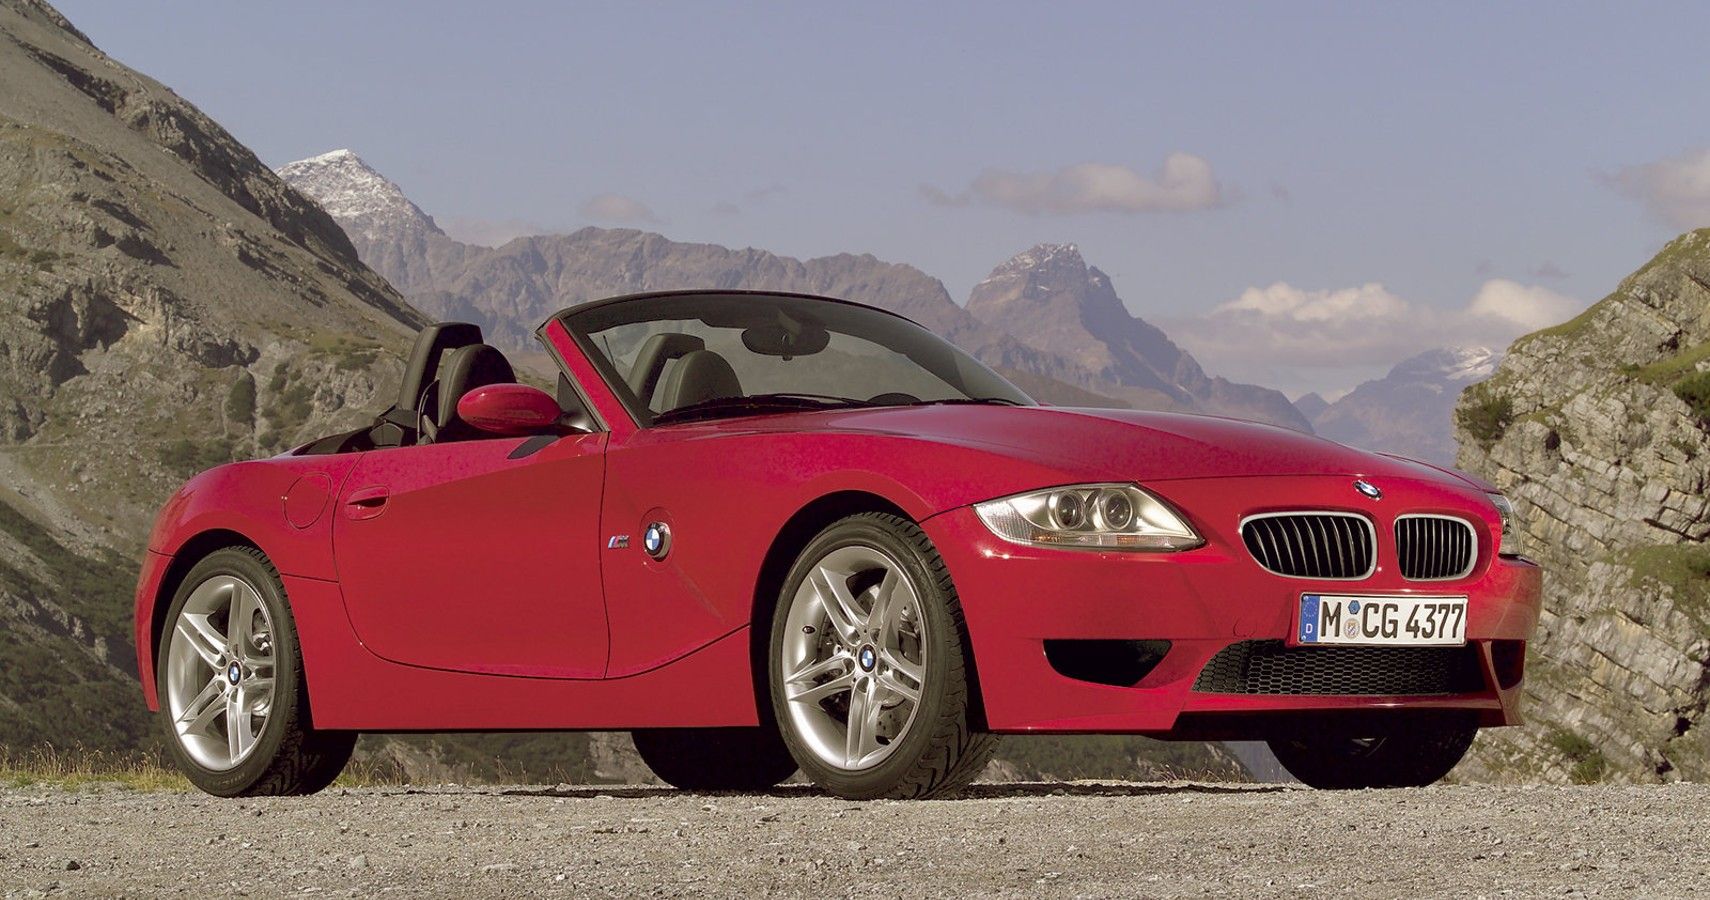 Red 2006 BMW Z4 M Roadster parked